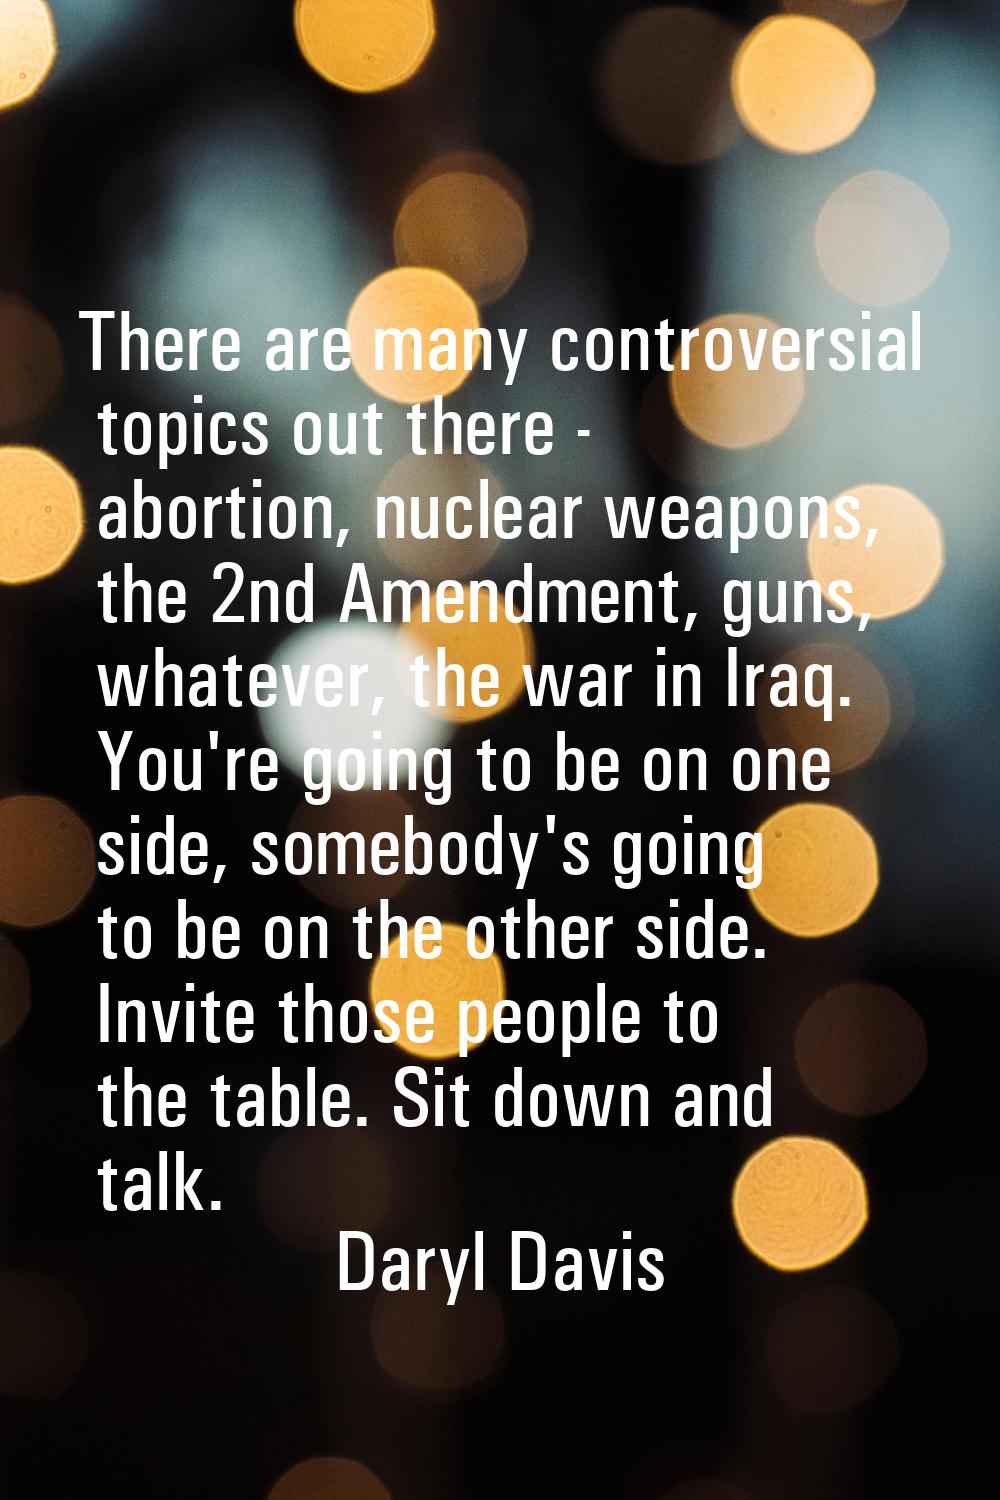 There are many controversial topics out there - abortion, nuclear weapons, the 2nd Amendment, guns,